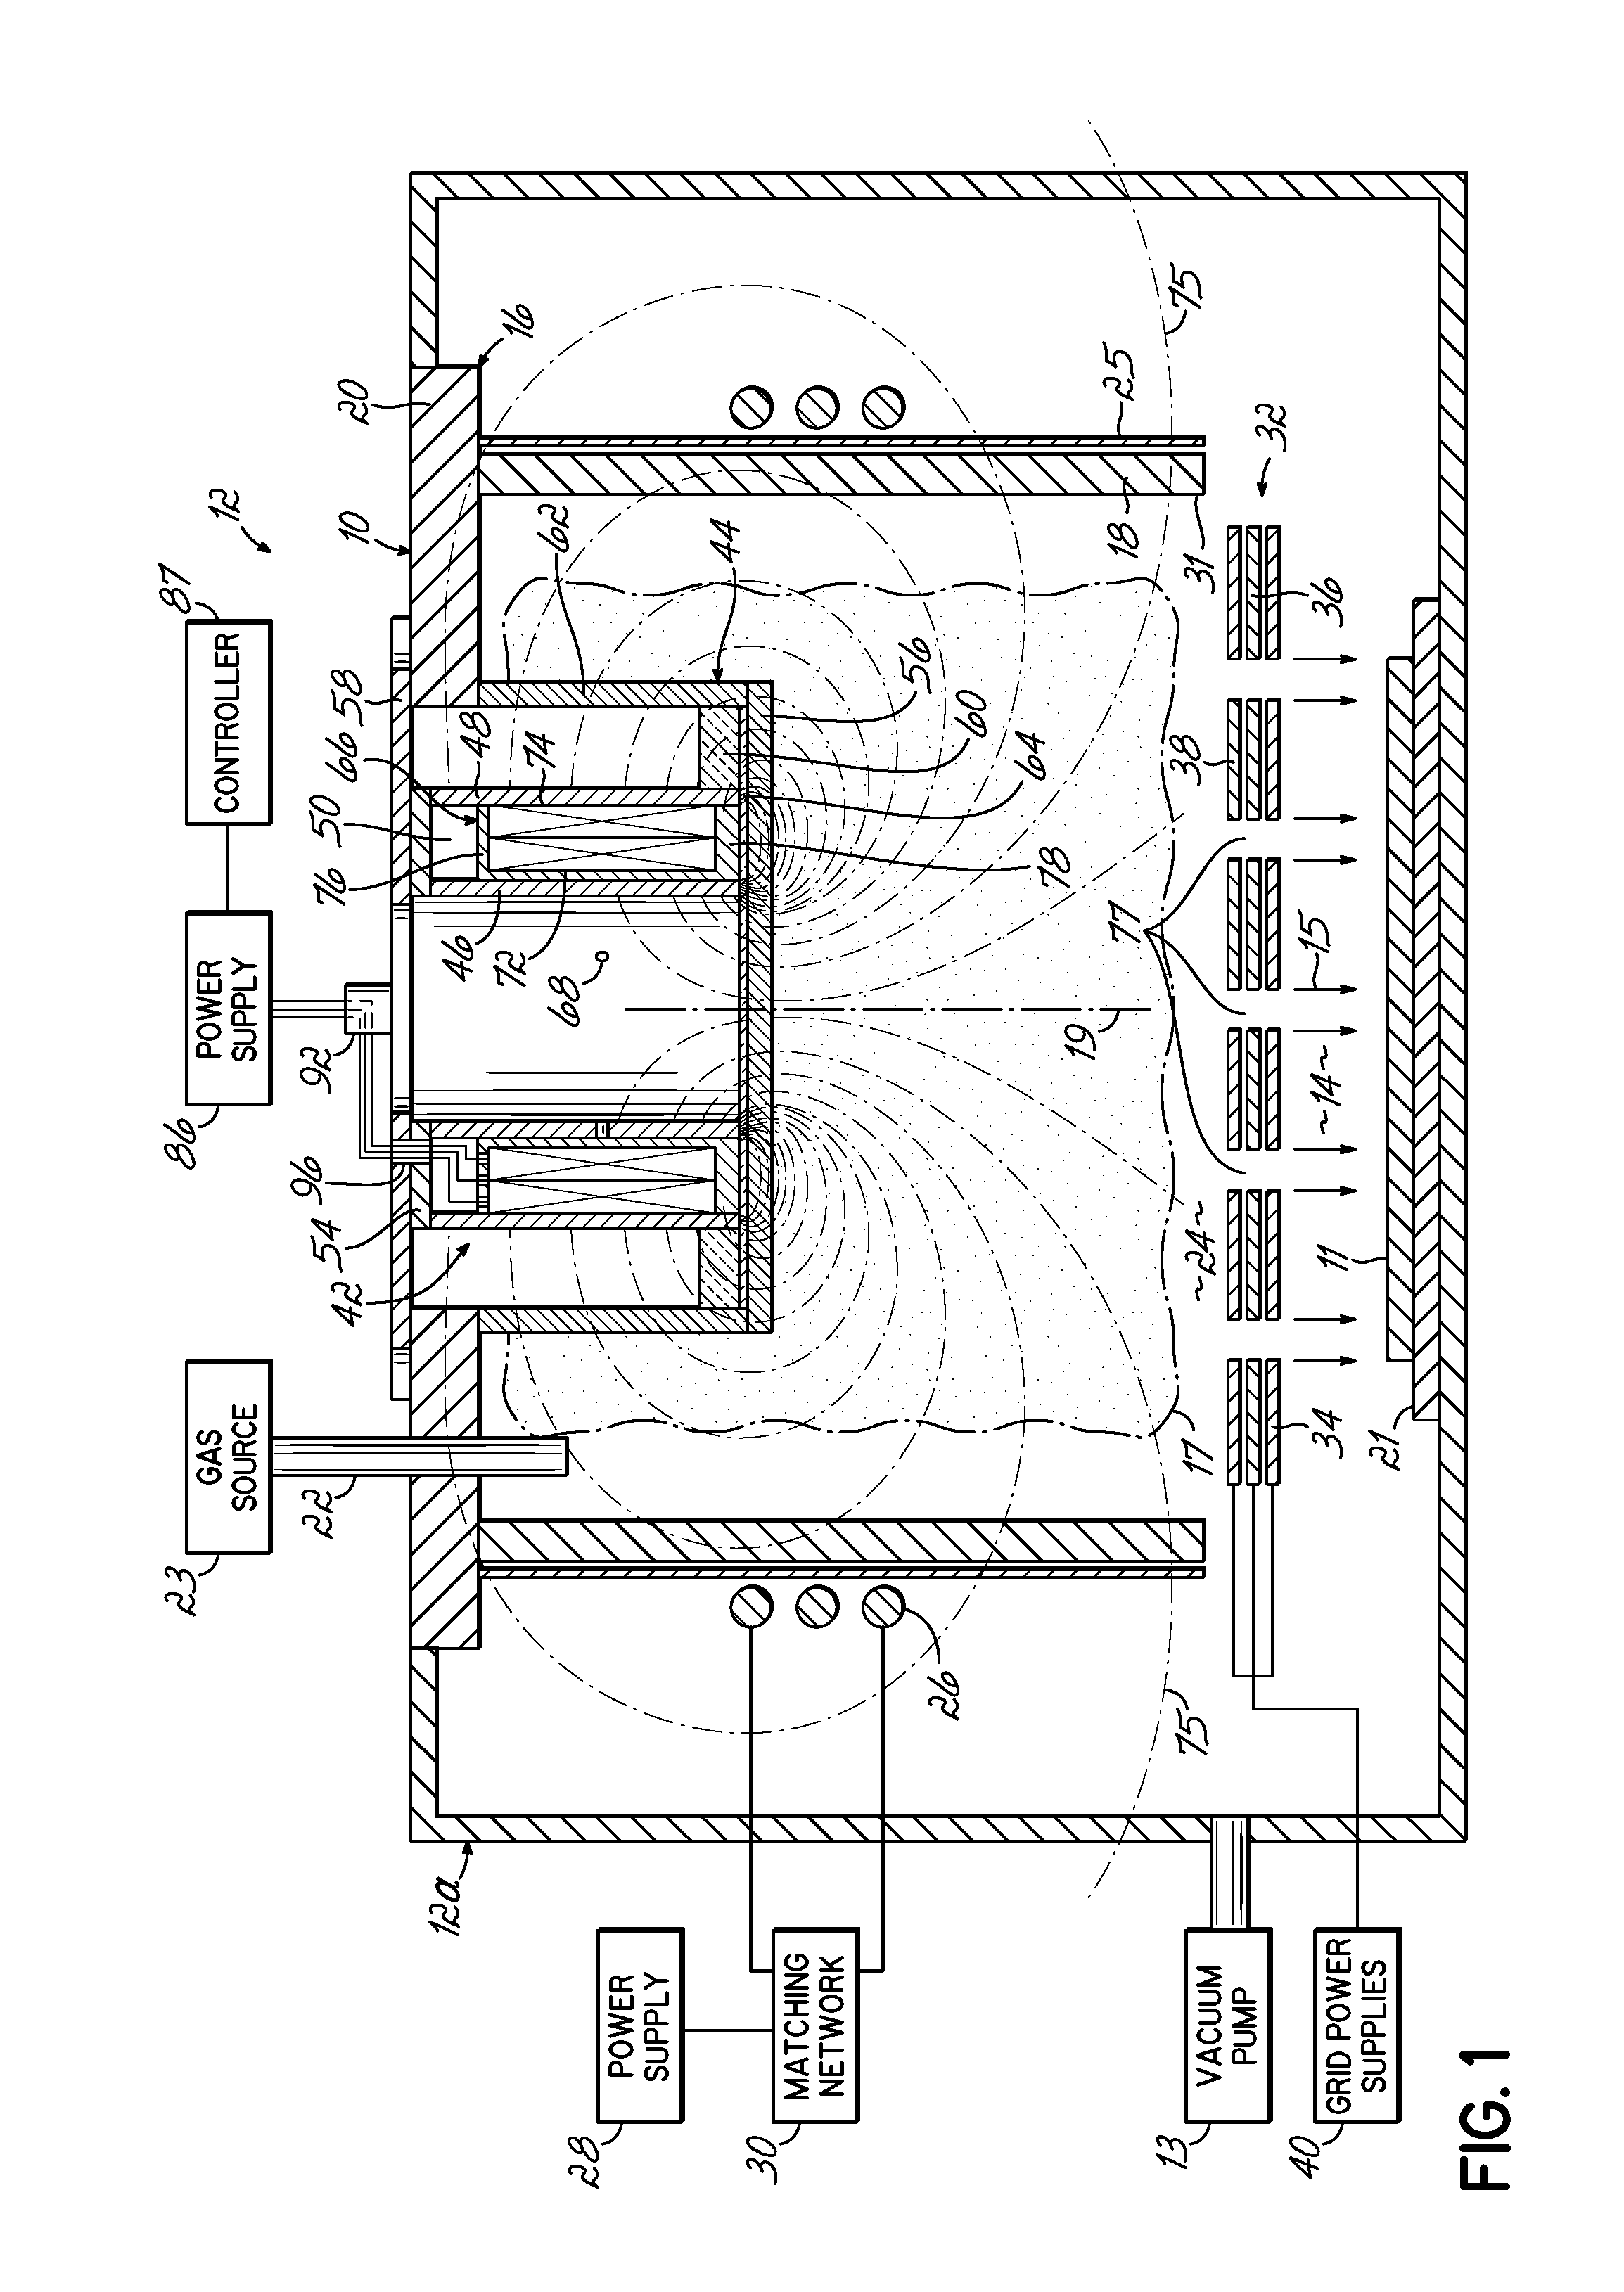 Ion sources and methods for generating an ion beam with controllable ion current density distribution